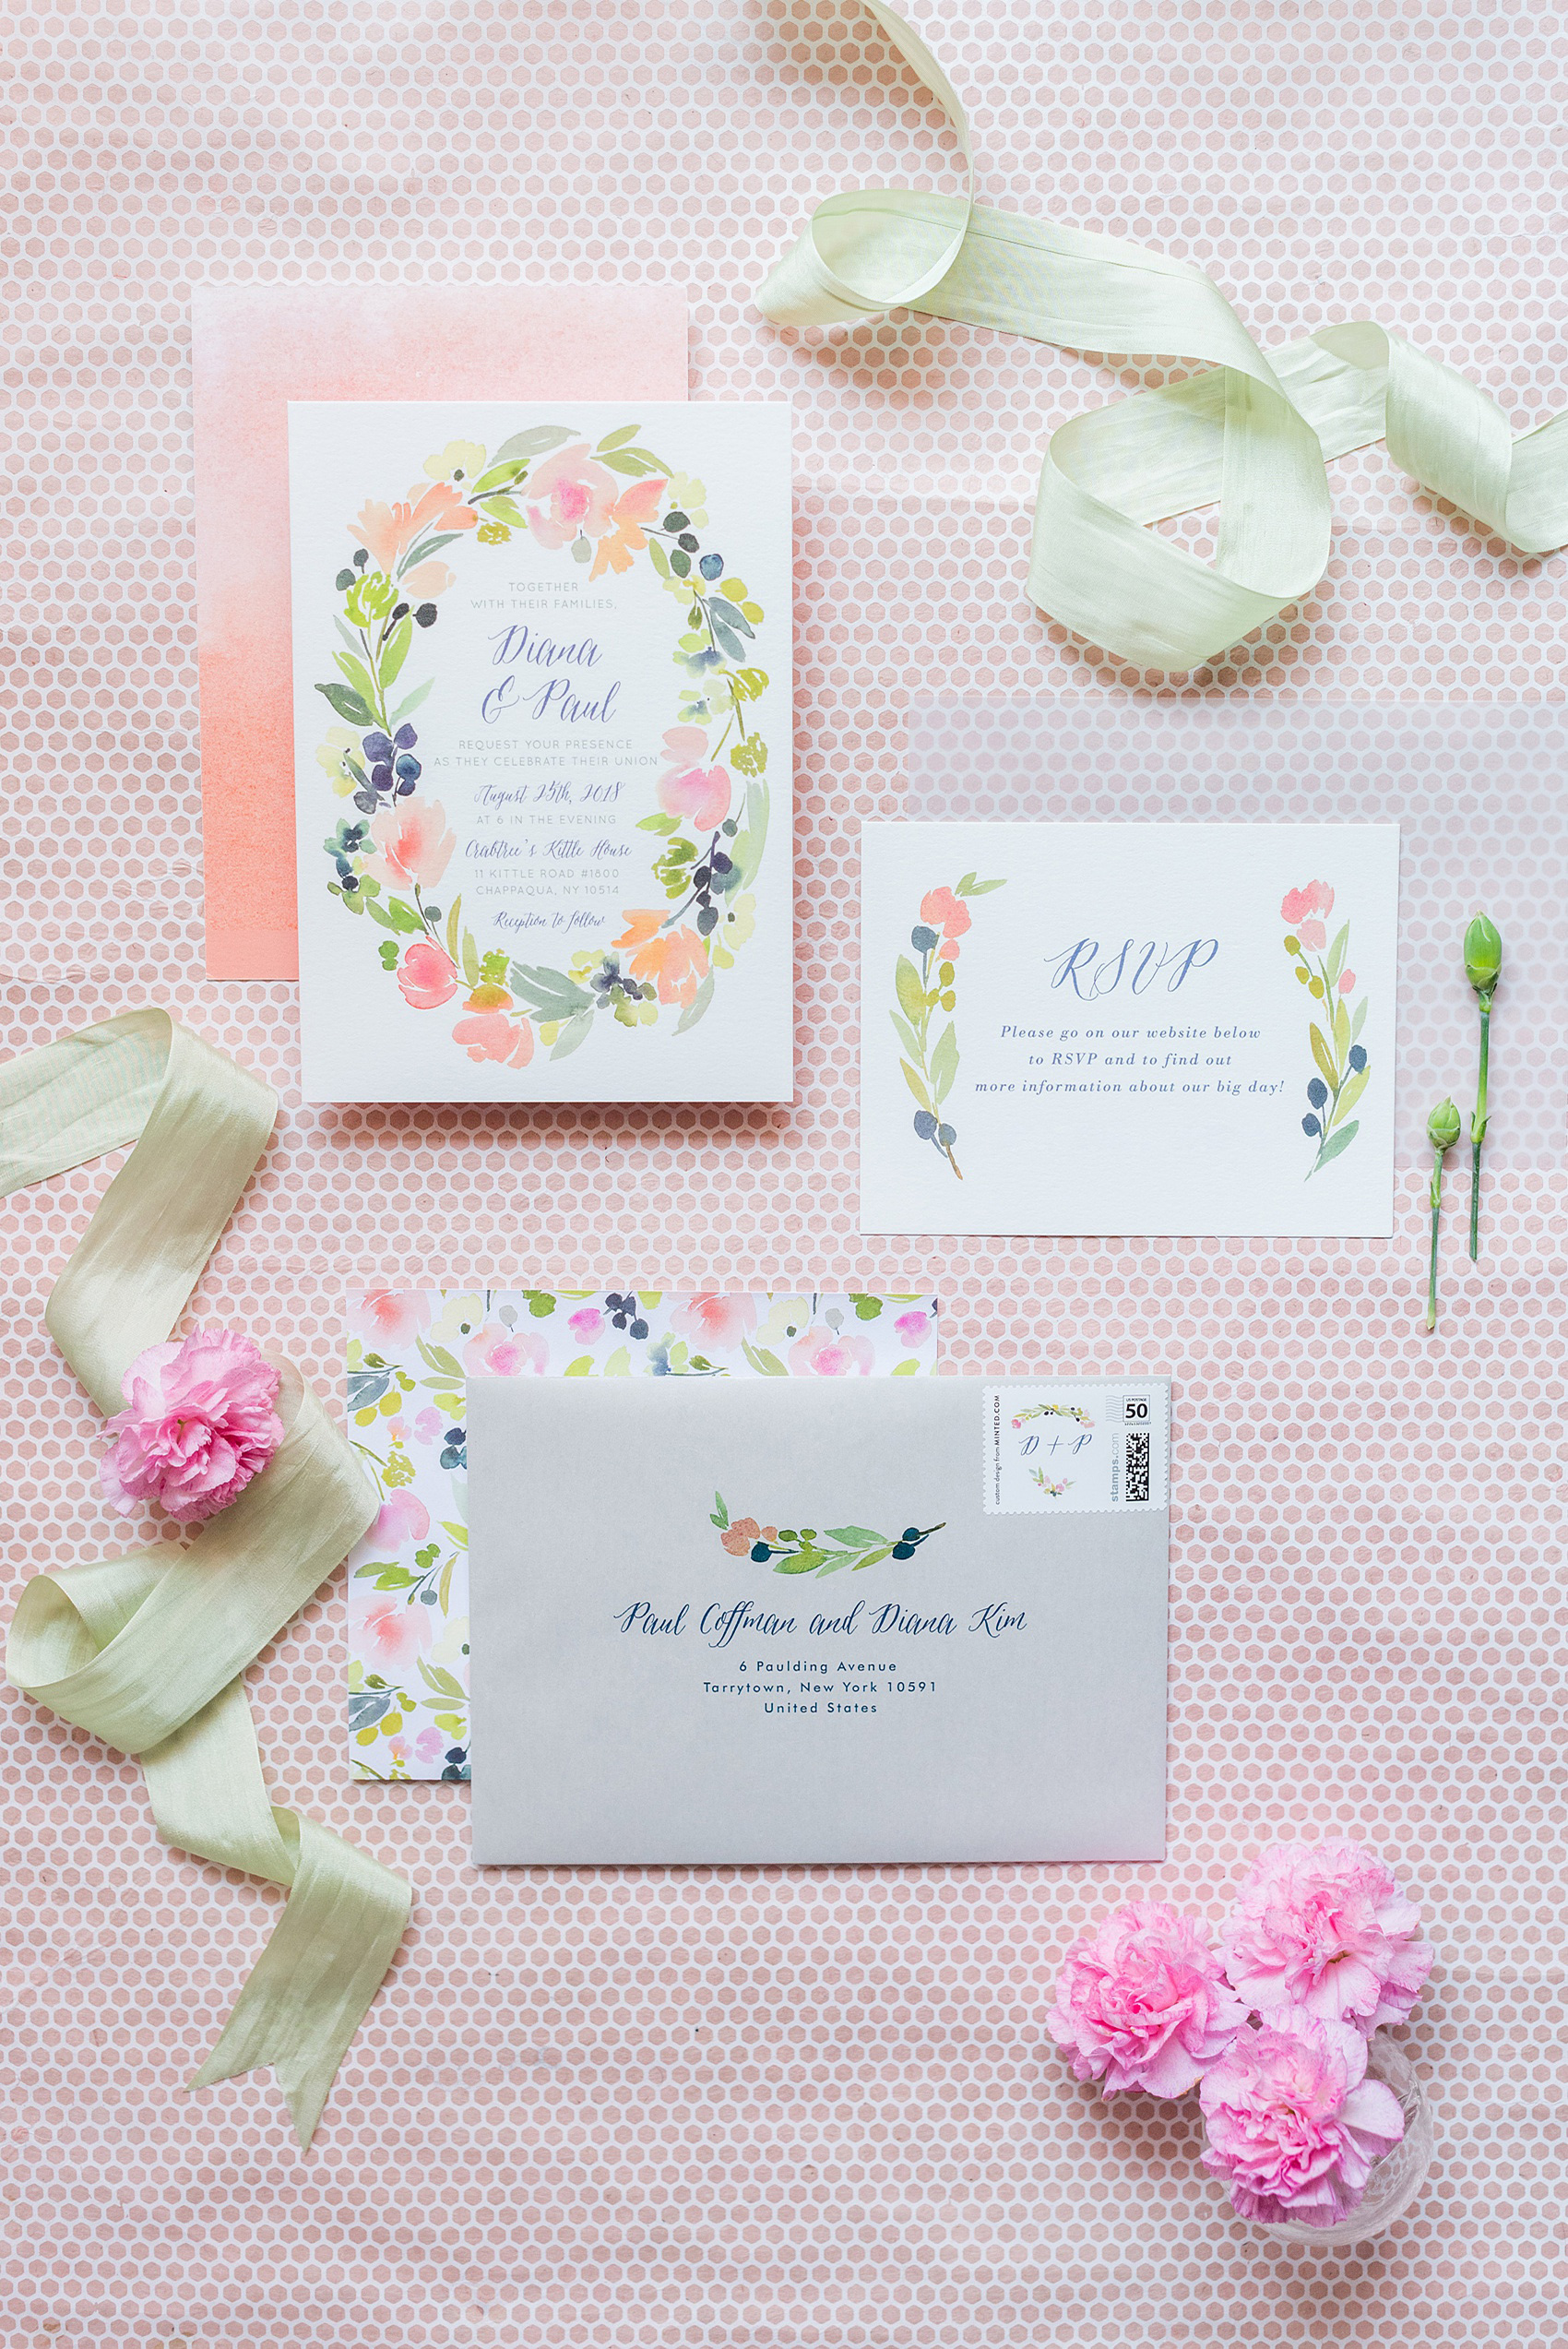 Wedding photos at Crabtree's Kittle House in Chappaqua, New York by Mikkel Paige Photography. This detail image shows the bride and groom's watercolor inspired invitation from Minted with silver envelopes, matching custom stamps and special liner. Click through to see more details from this gorgeous day! #mikkelpaige #CrabtreesKittleHouse #WestchesterWeddingVenues #WestchesterWedding #summerwedding #weddingdetails #weddinginvitation #mintedinvitation #watercolorinvitation #weddingstationery